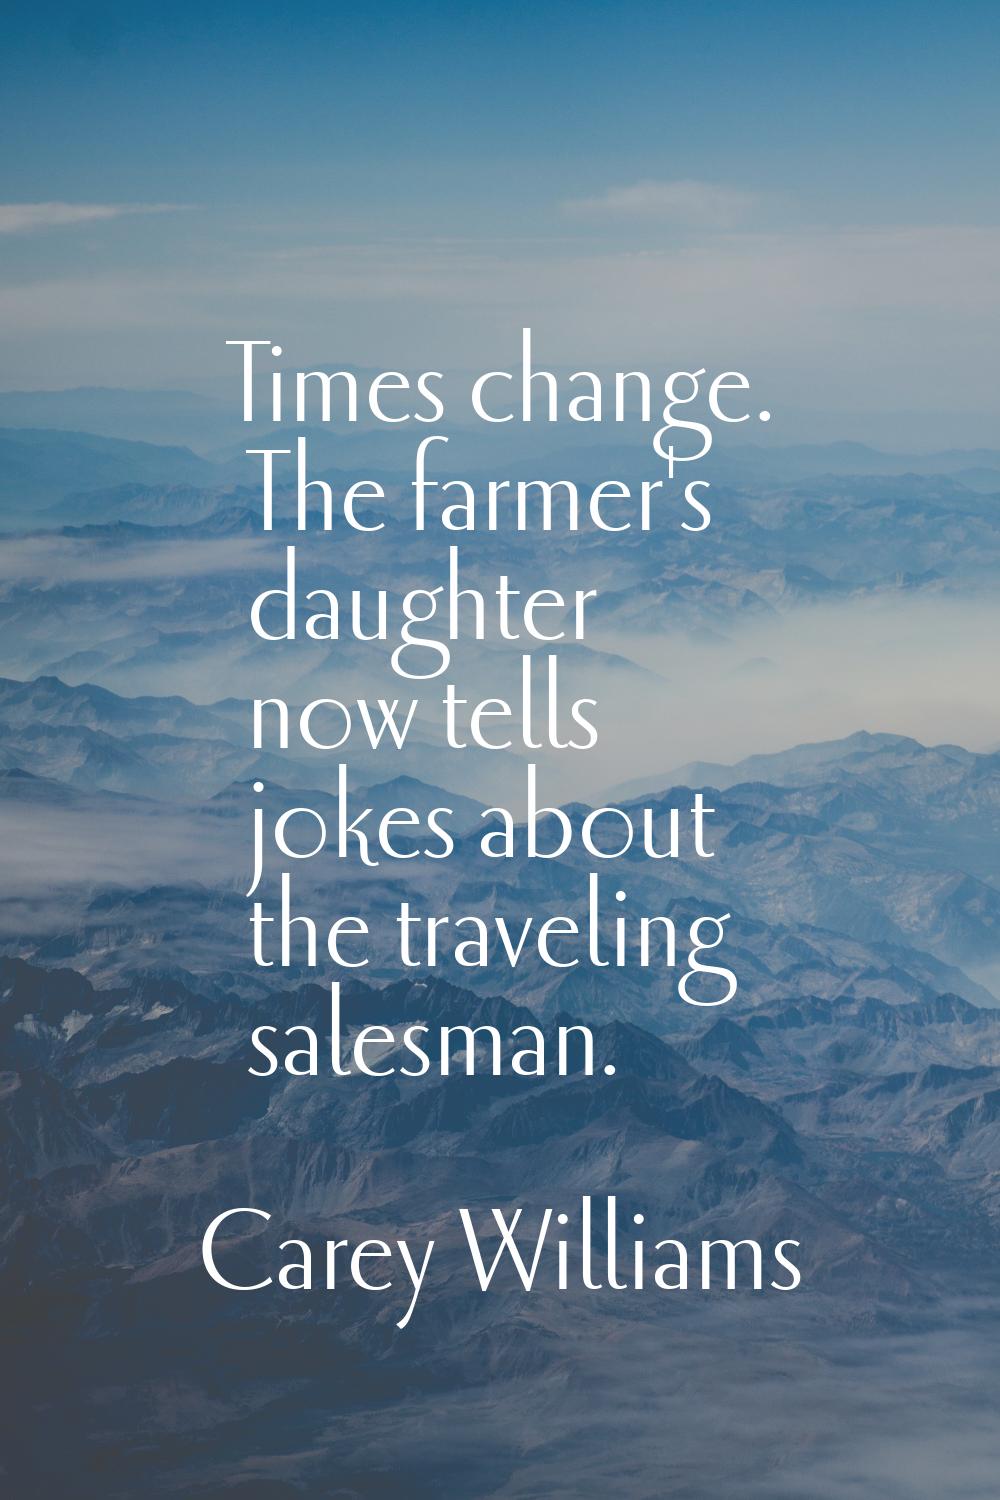 Times change. The farmer's daughter now tells jokes about the traveling salesman.